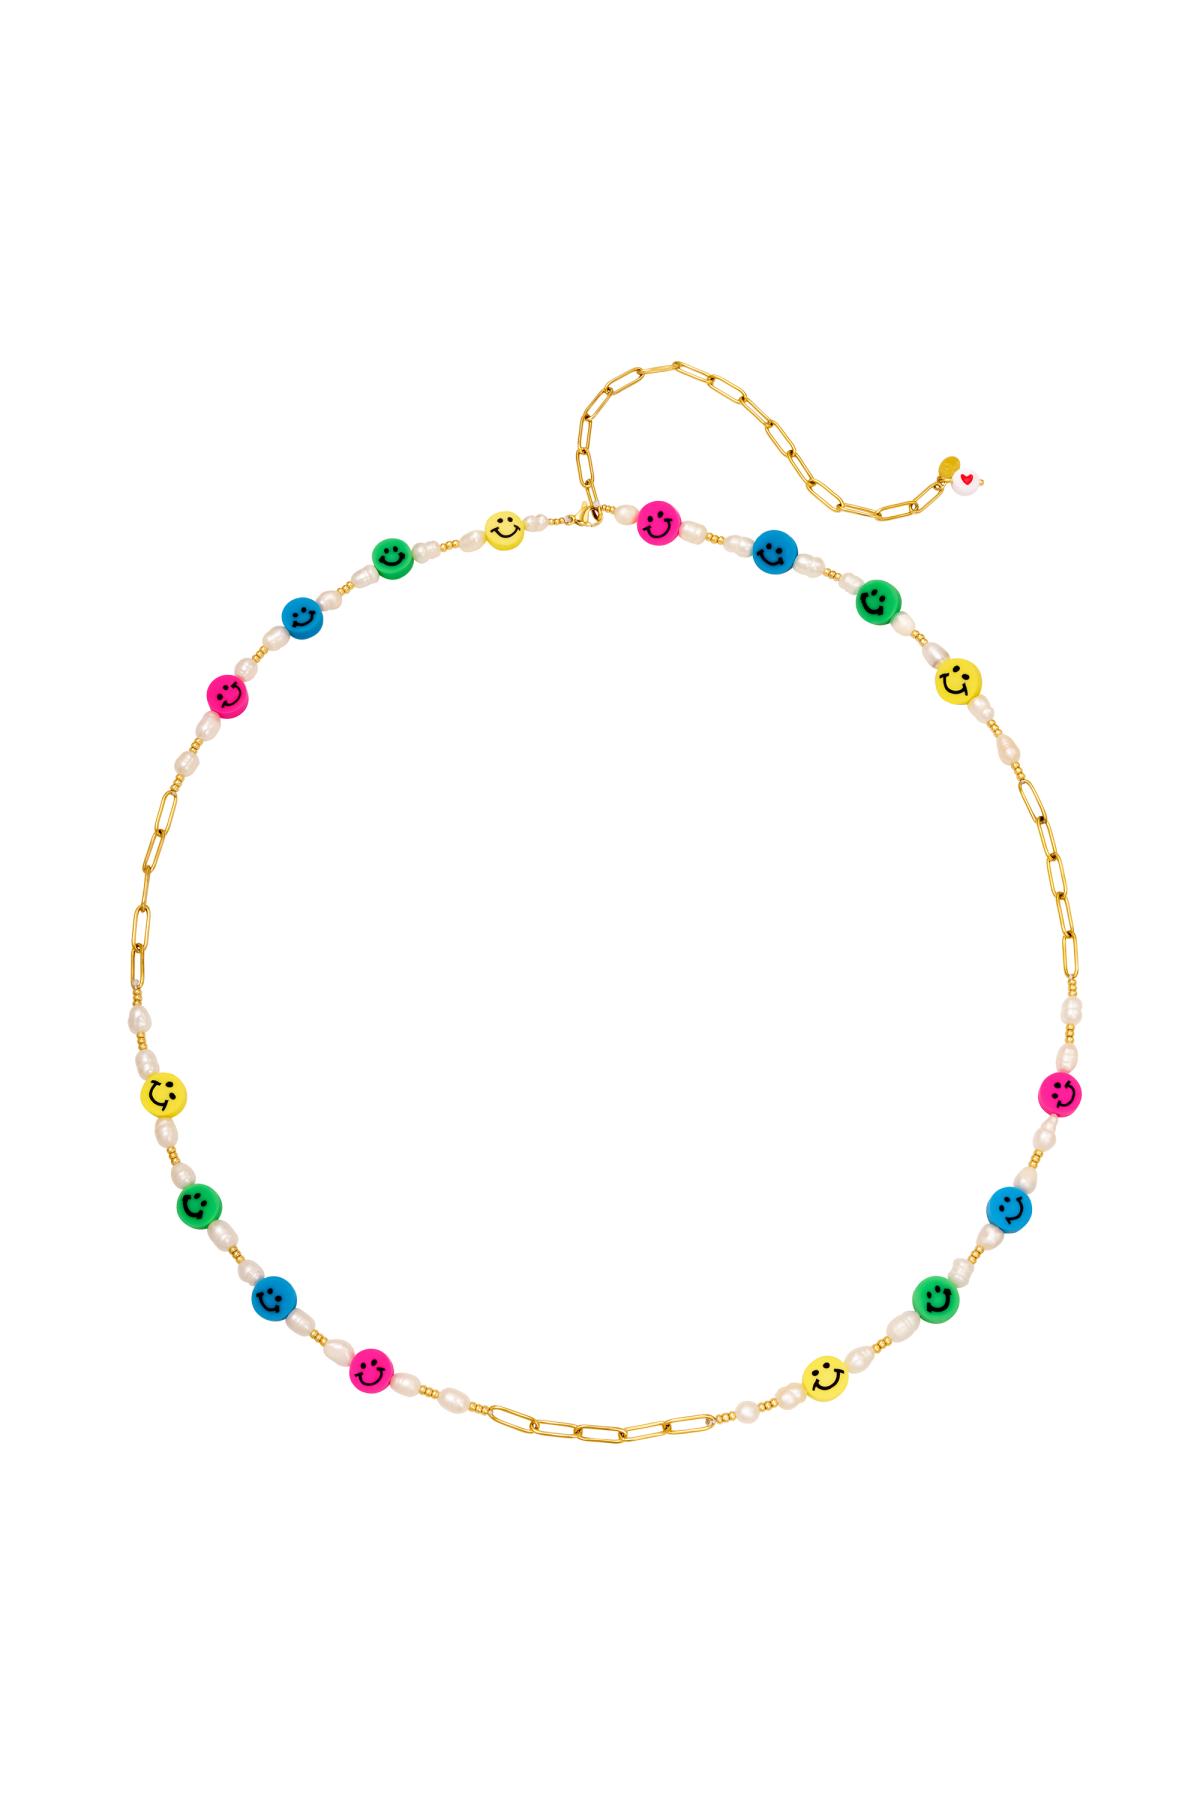 Waist chain smileys & pearls Gold Stainless Steel 